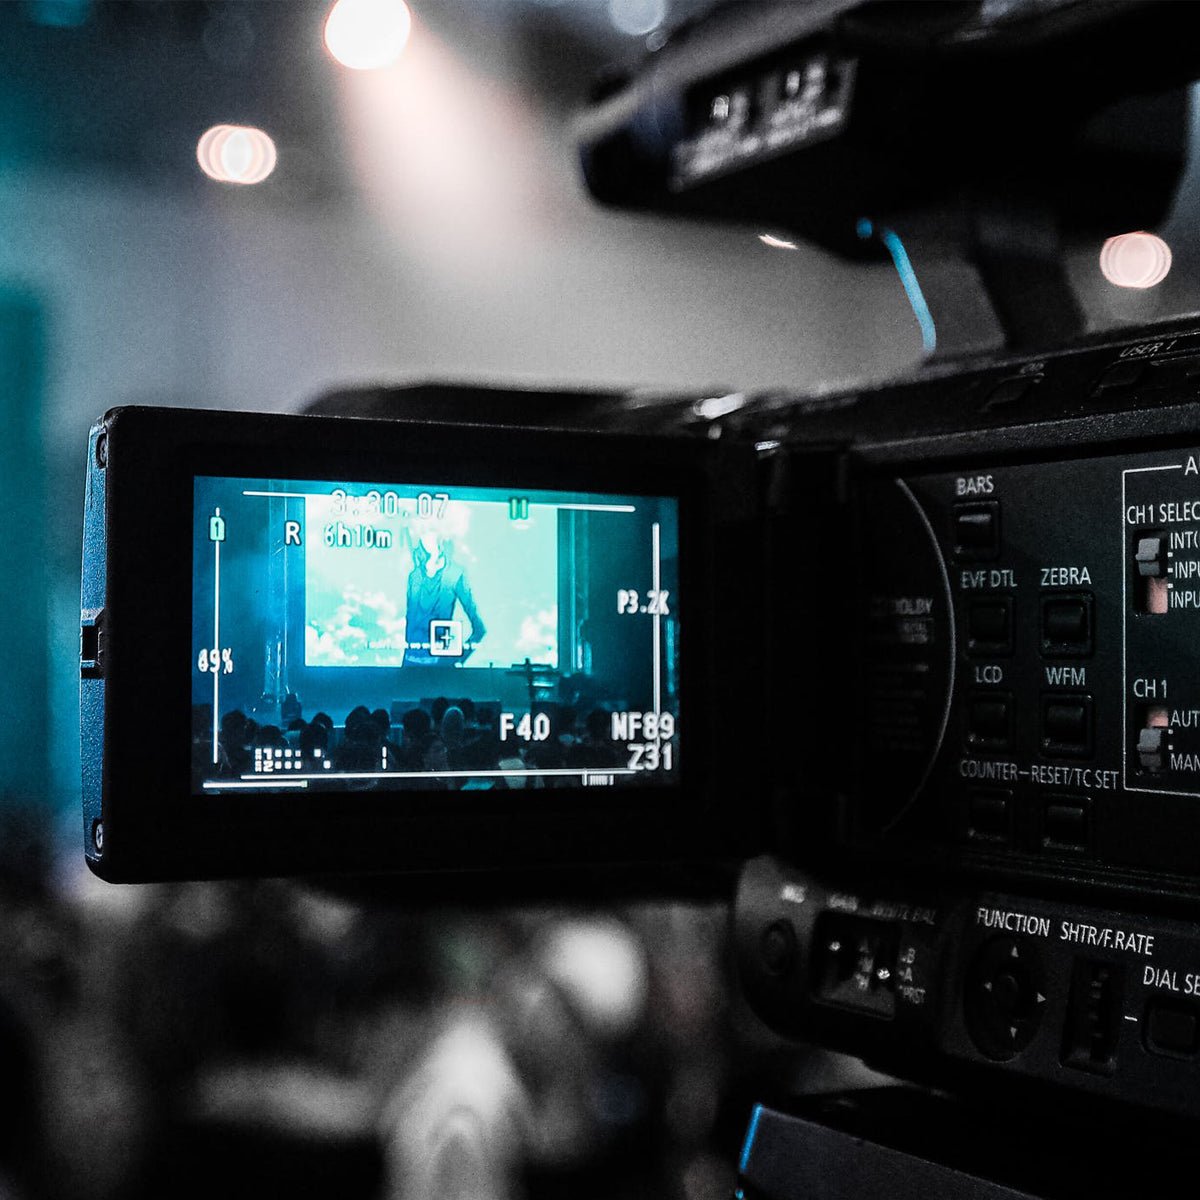 Why is video editing so valuable to learn?